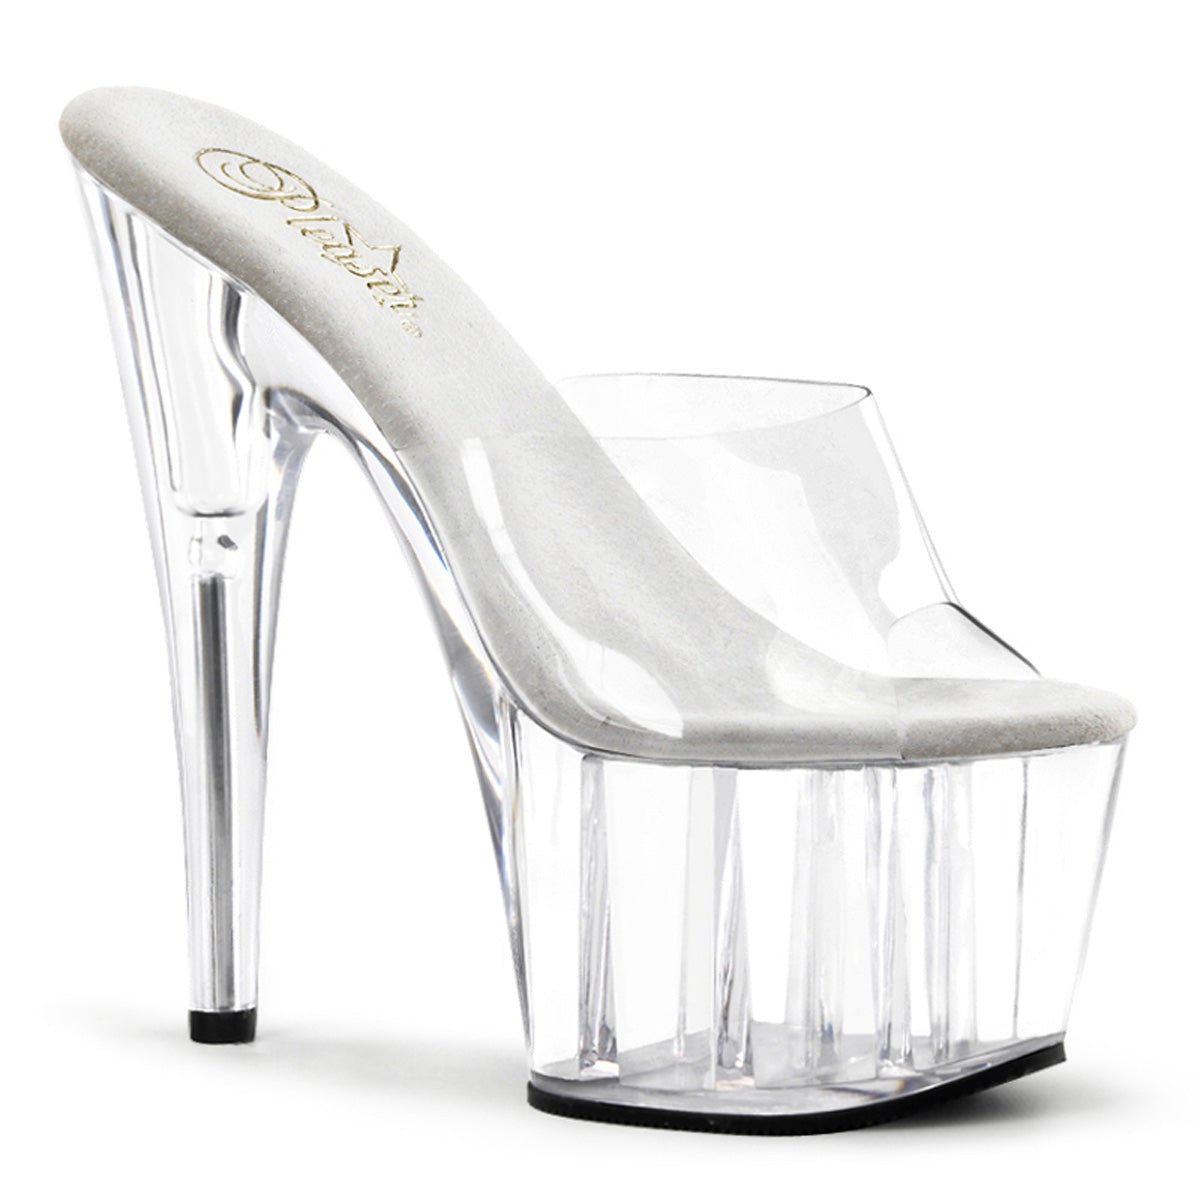 Clearance Pleaser Adore 701 Clear/Clear Size 4UK/7USA